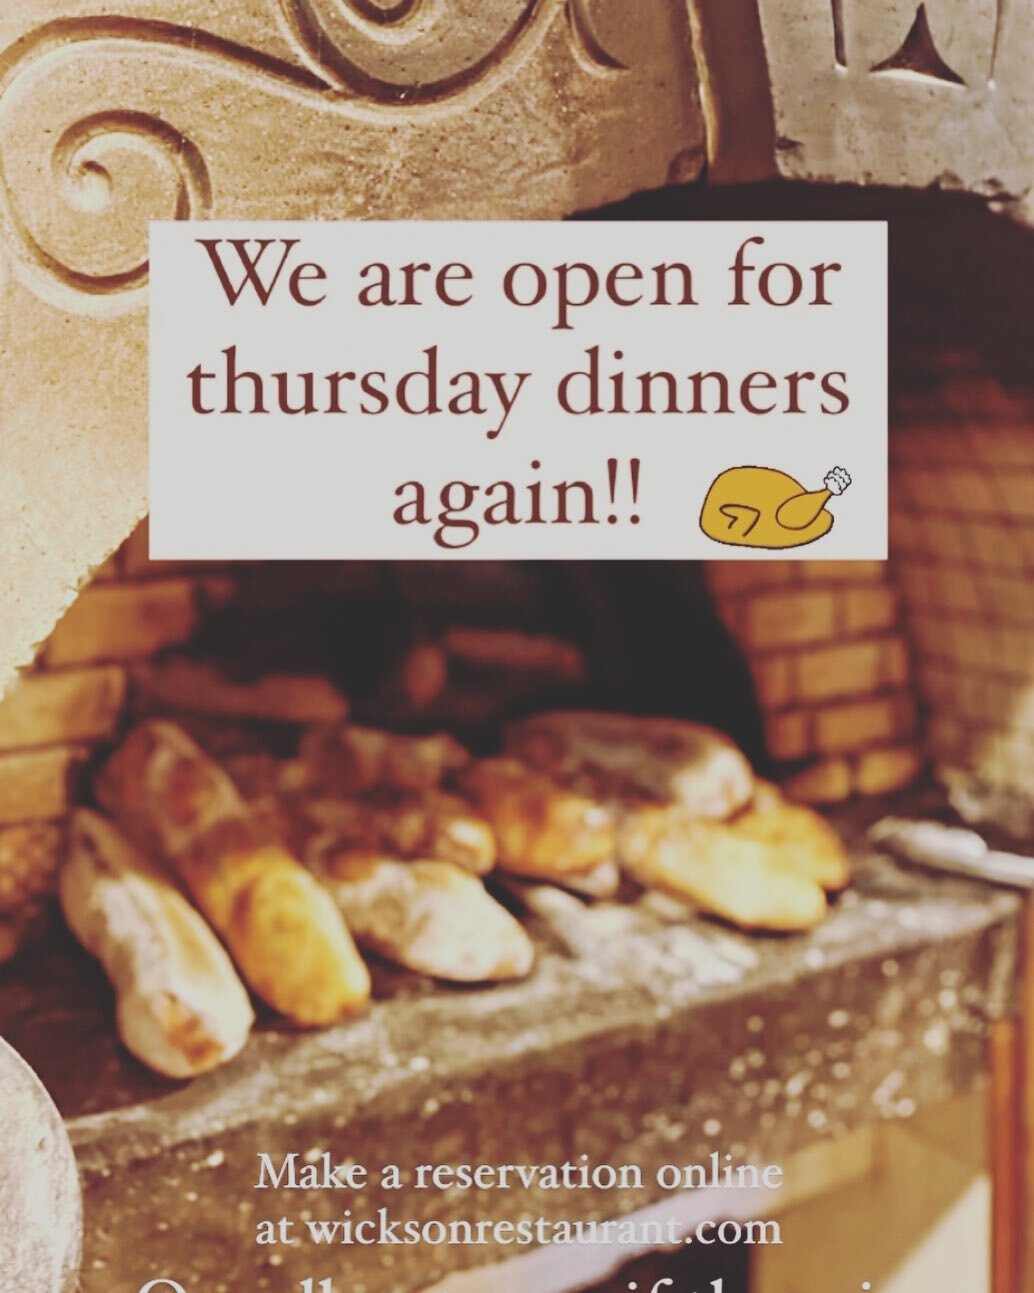 Open for Thursday Dinner again. Make your reservation online at wicksonrestaurant.com. Or call us for last minute dining.